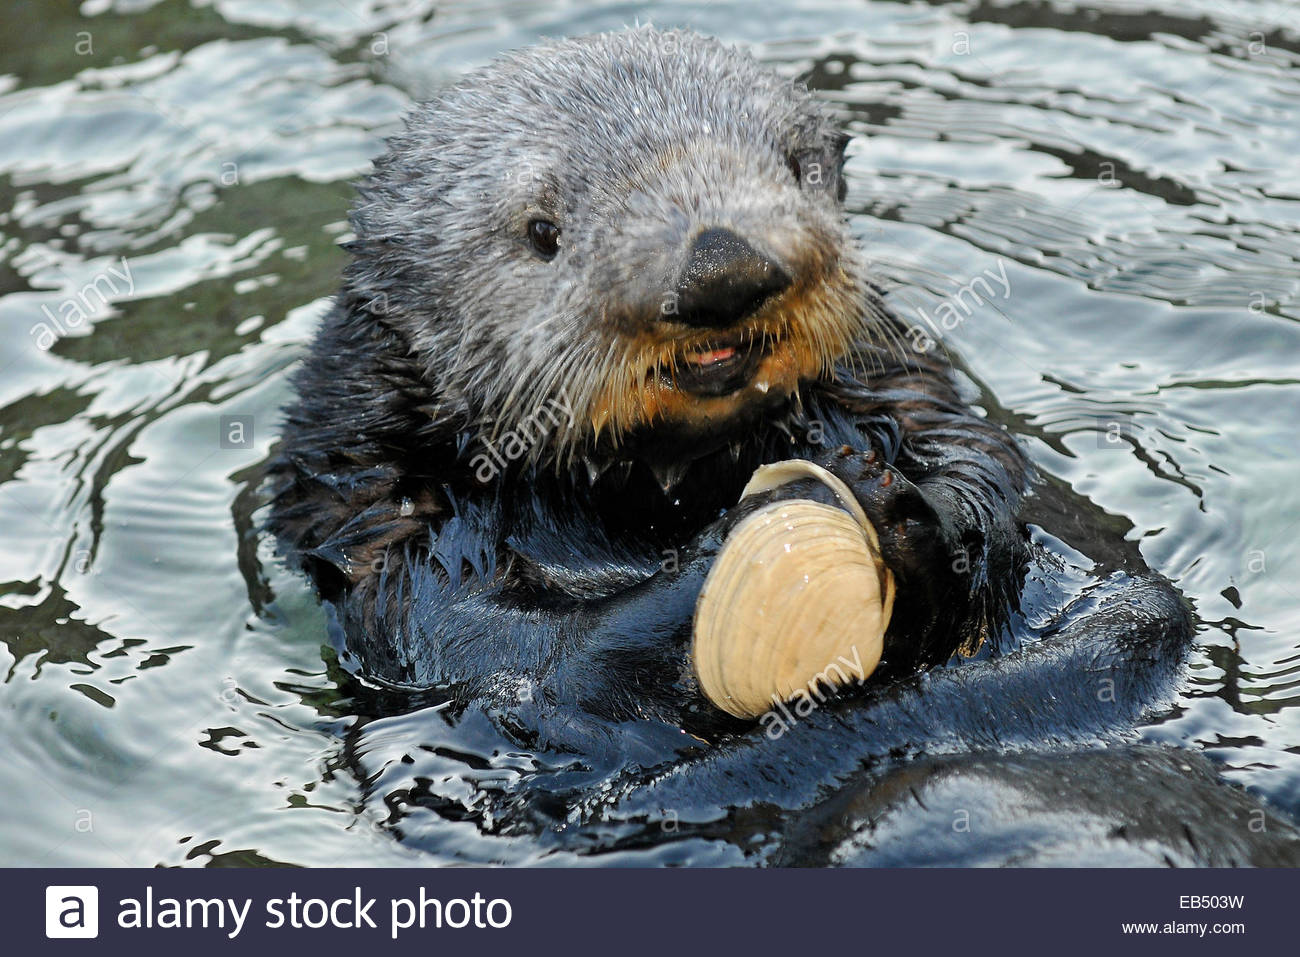 A sea otter, Enhydra lutris, eating a clam its holding on its Stock